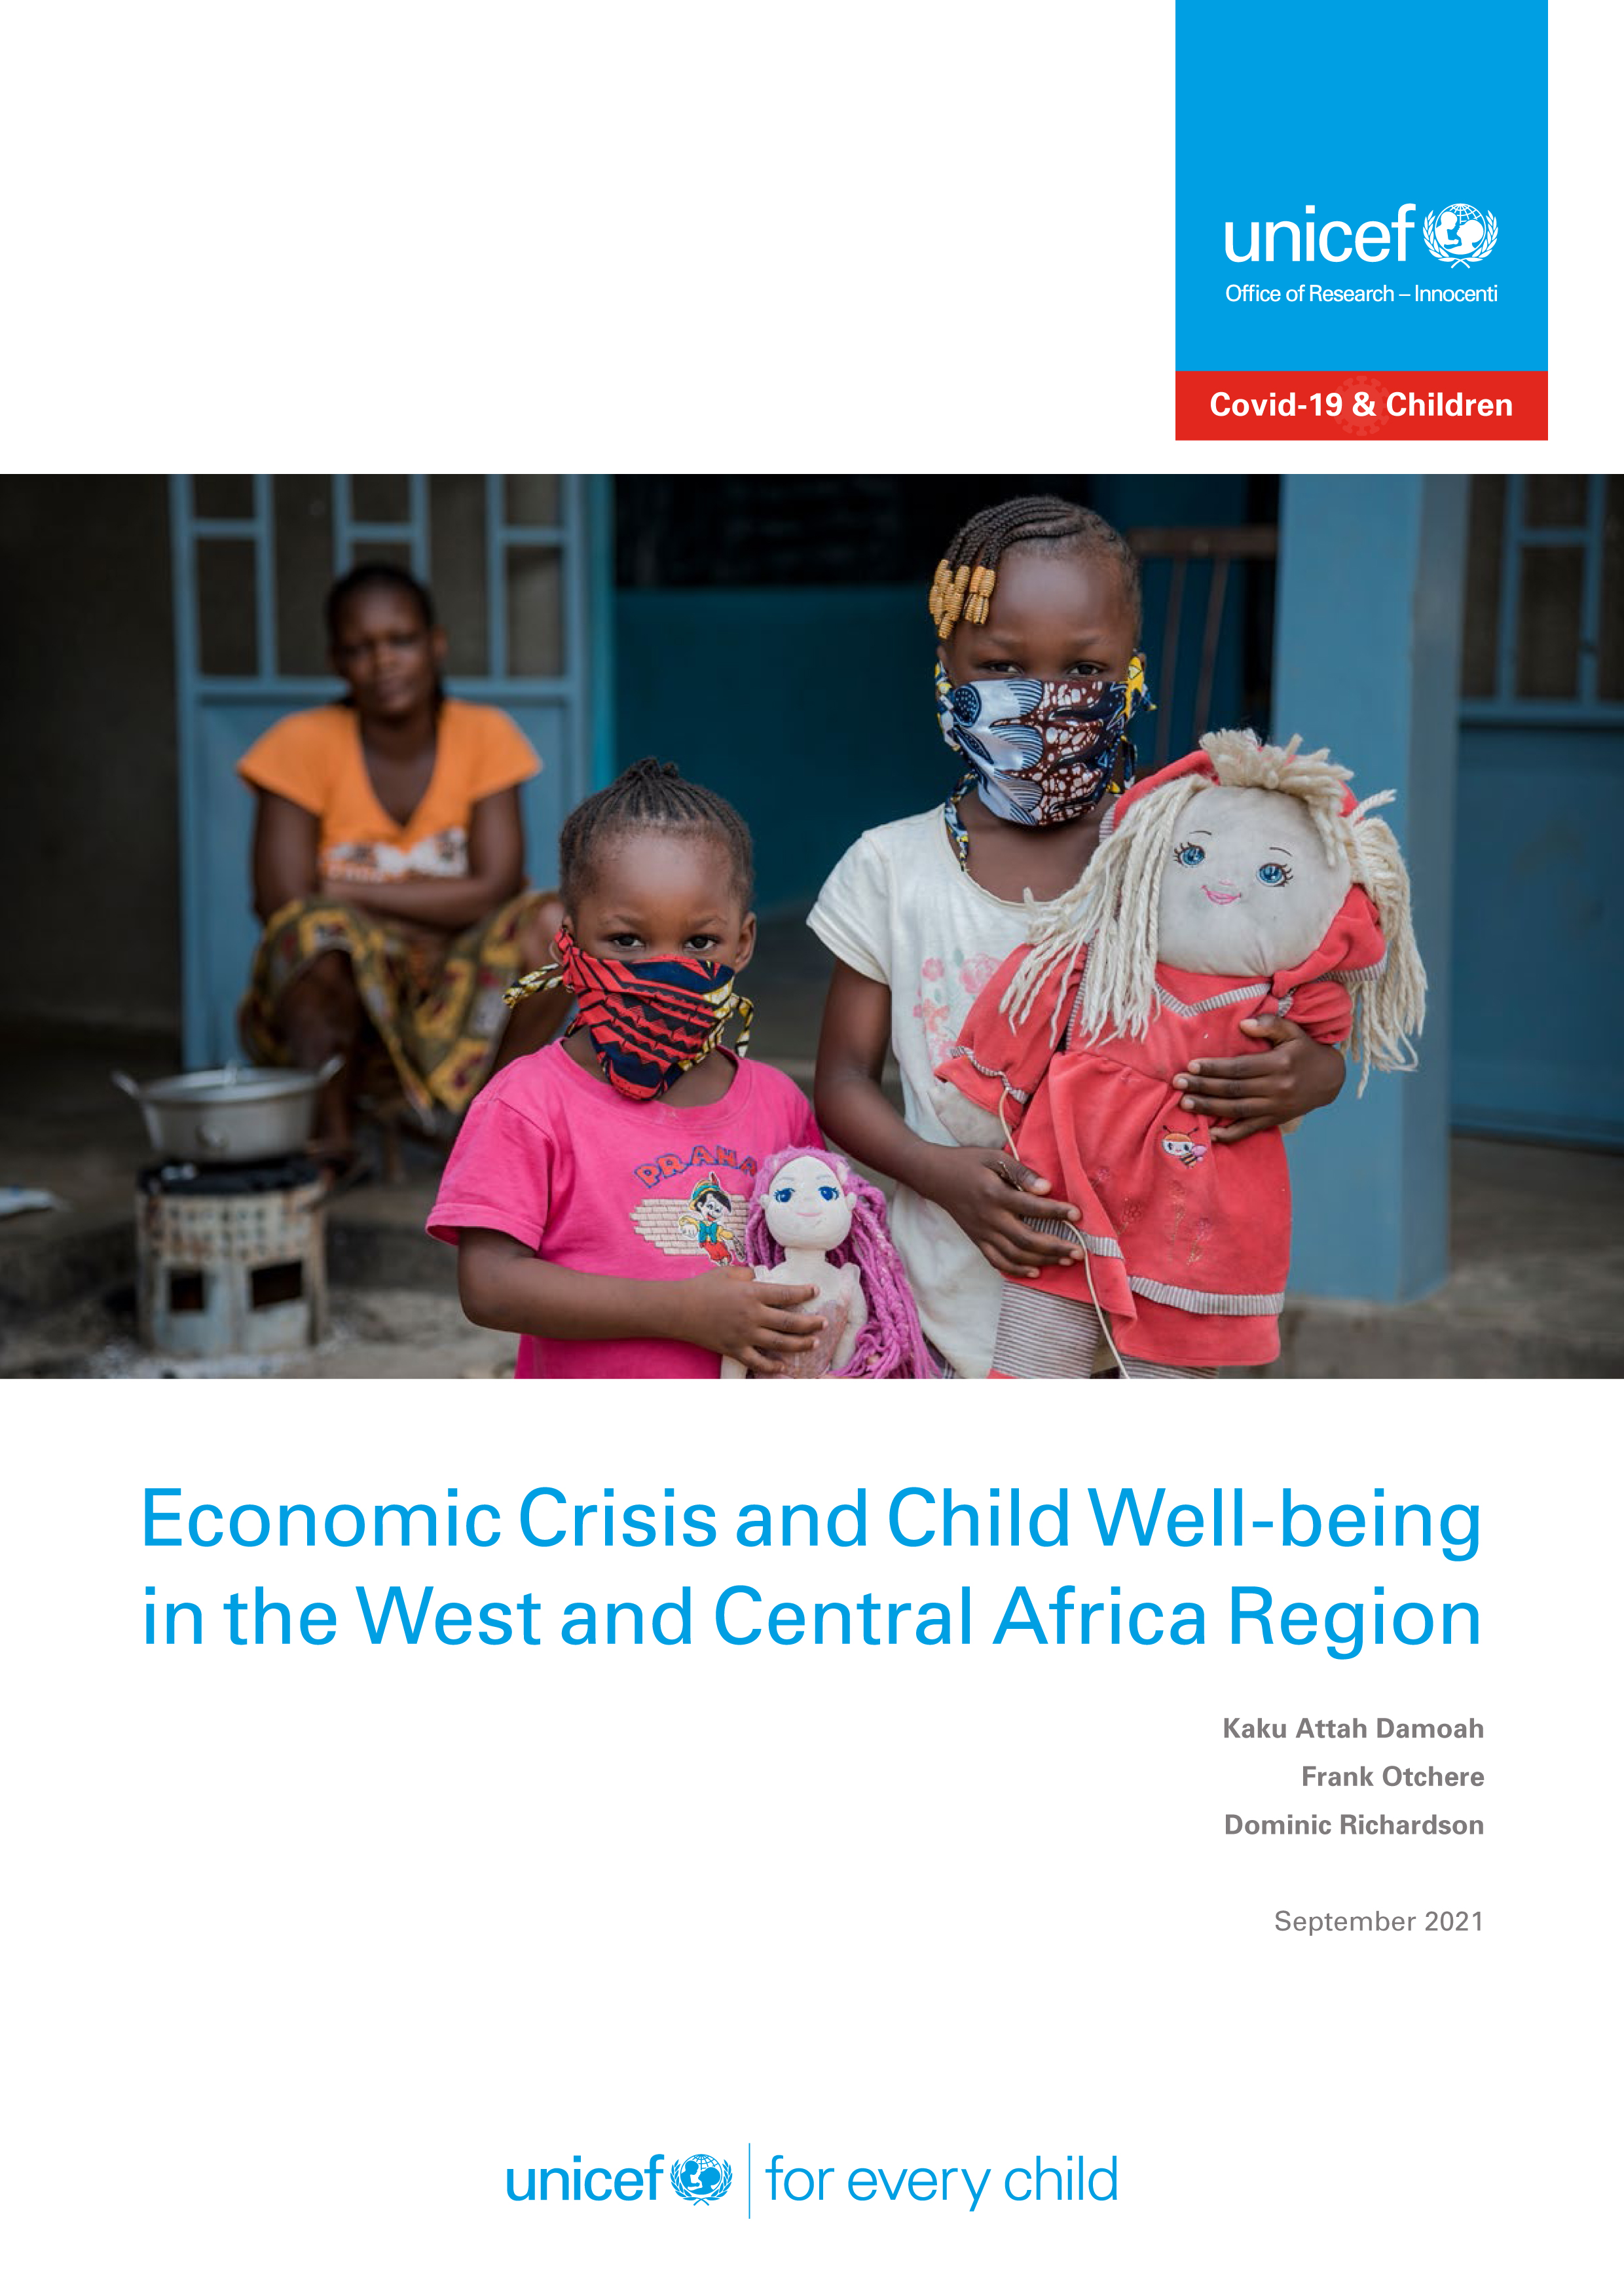 image of Macroeconomic outlook for west and central Africa, and implications for child well-being